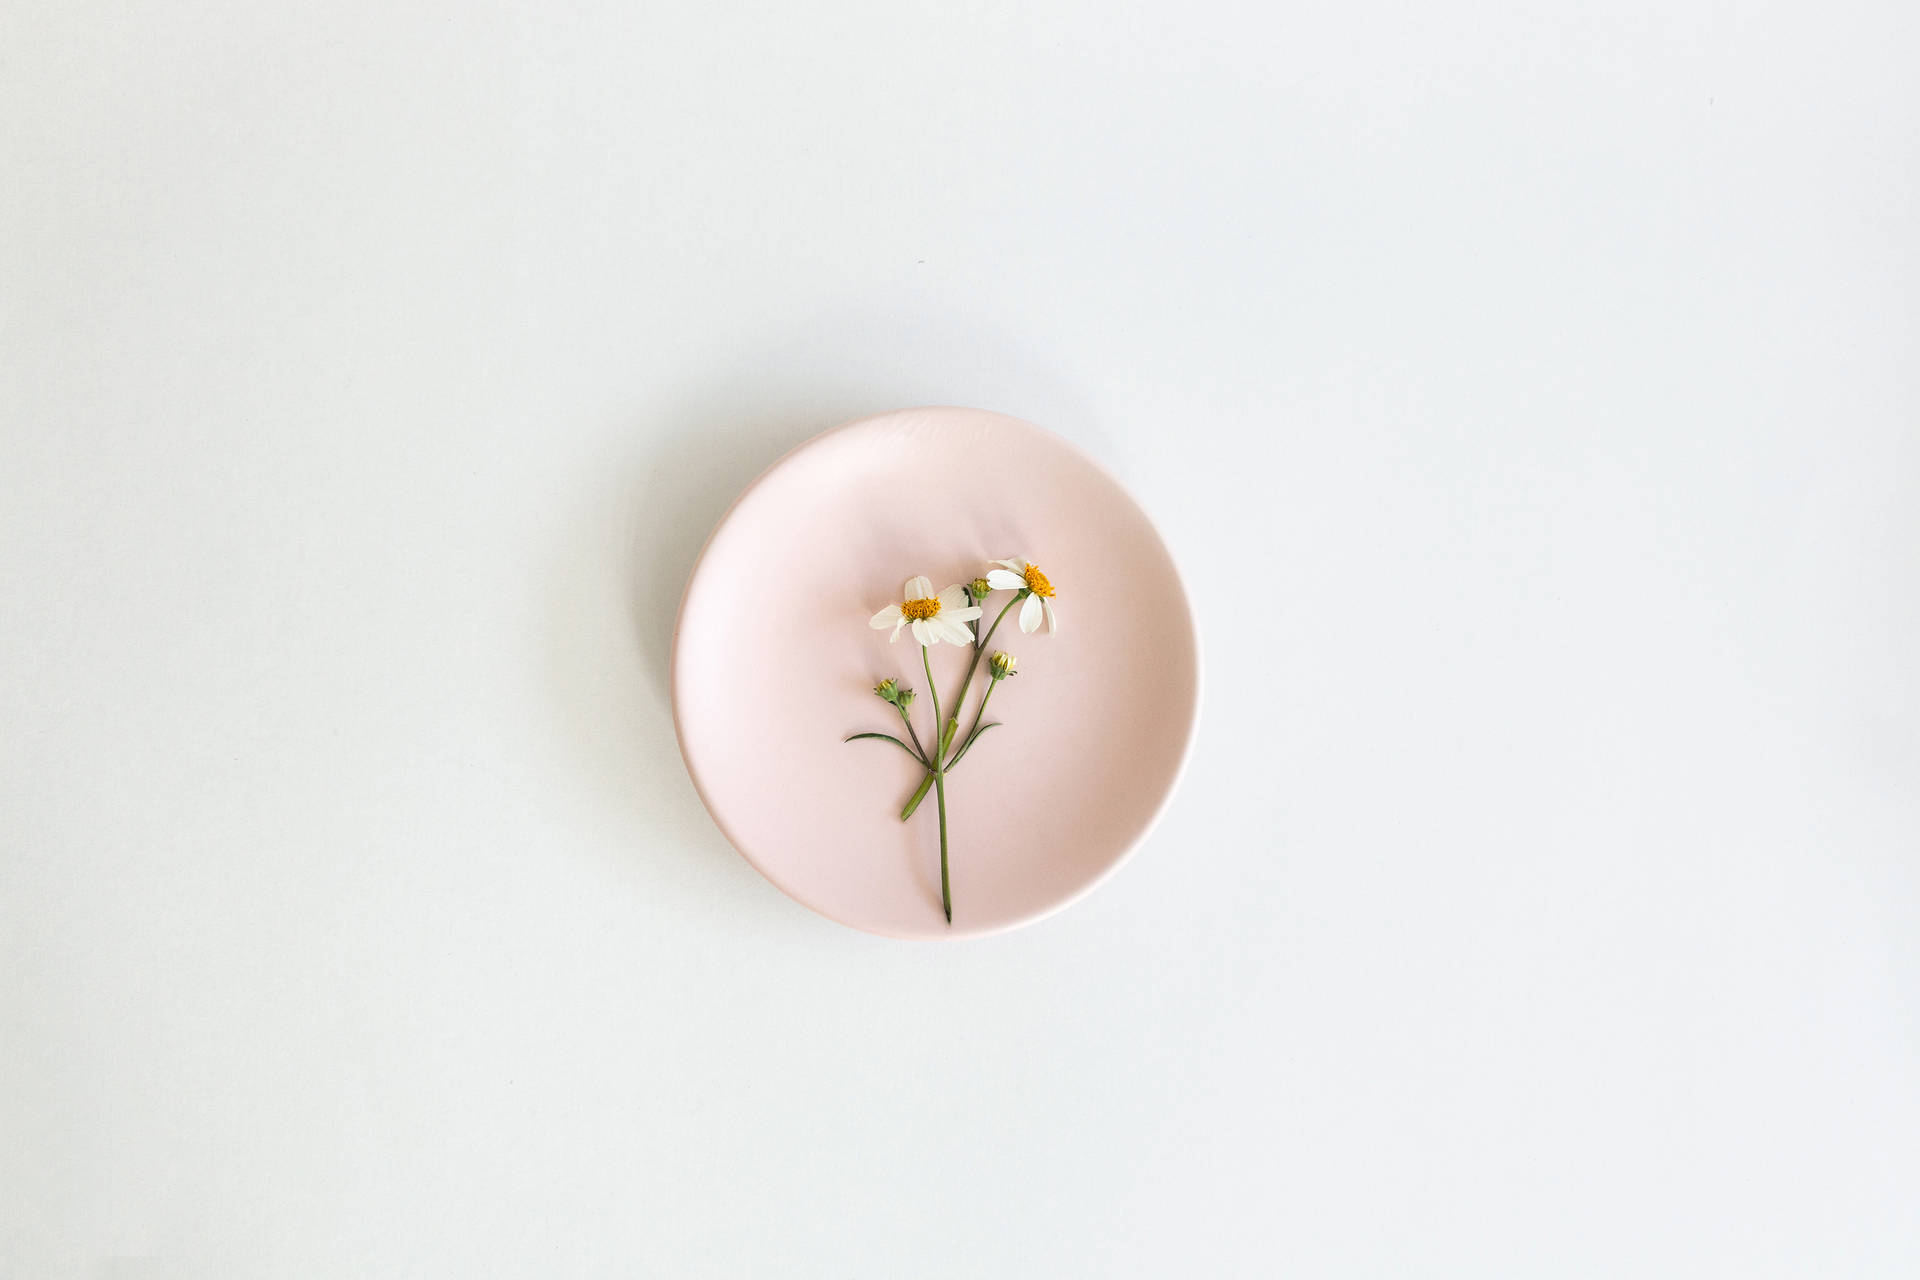 Girly Pink Aesthetic Flower Plate